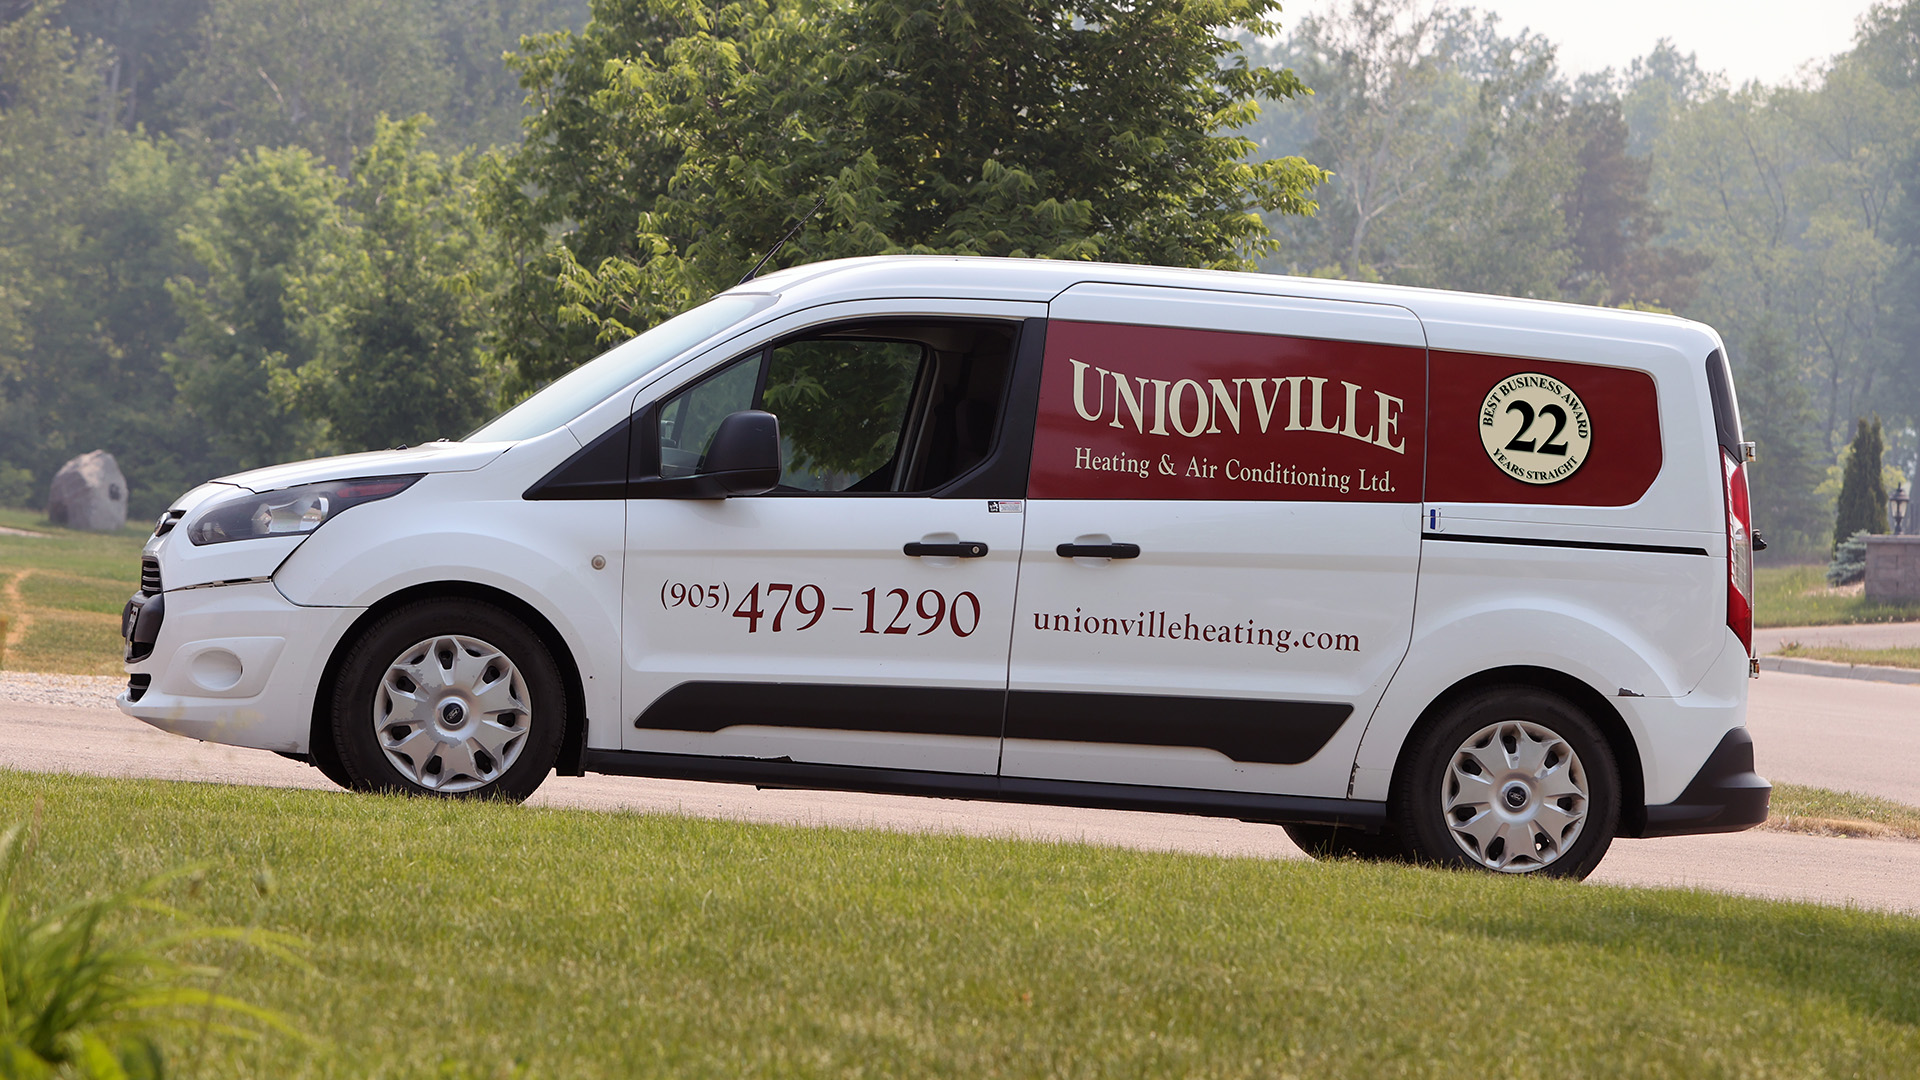 Unionville Heating and Air Conditioning service van BBA 22